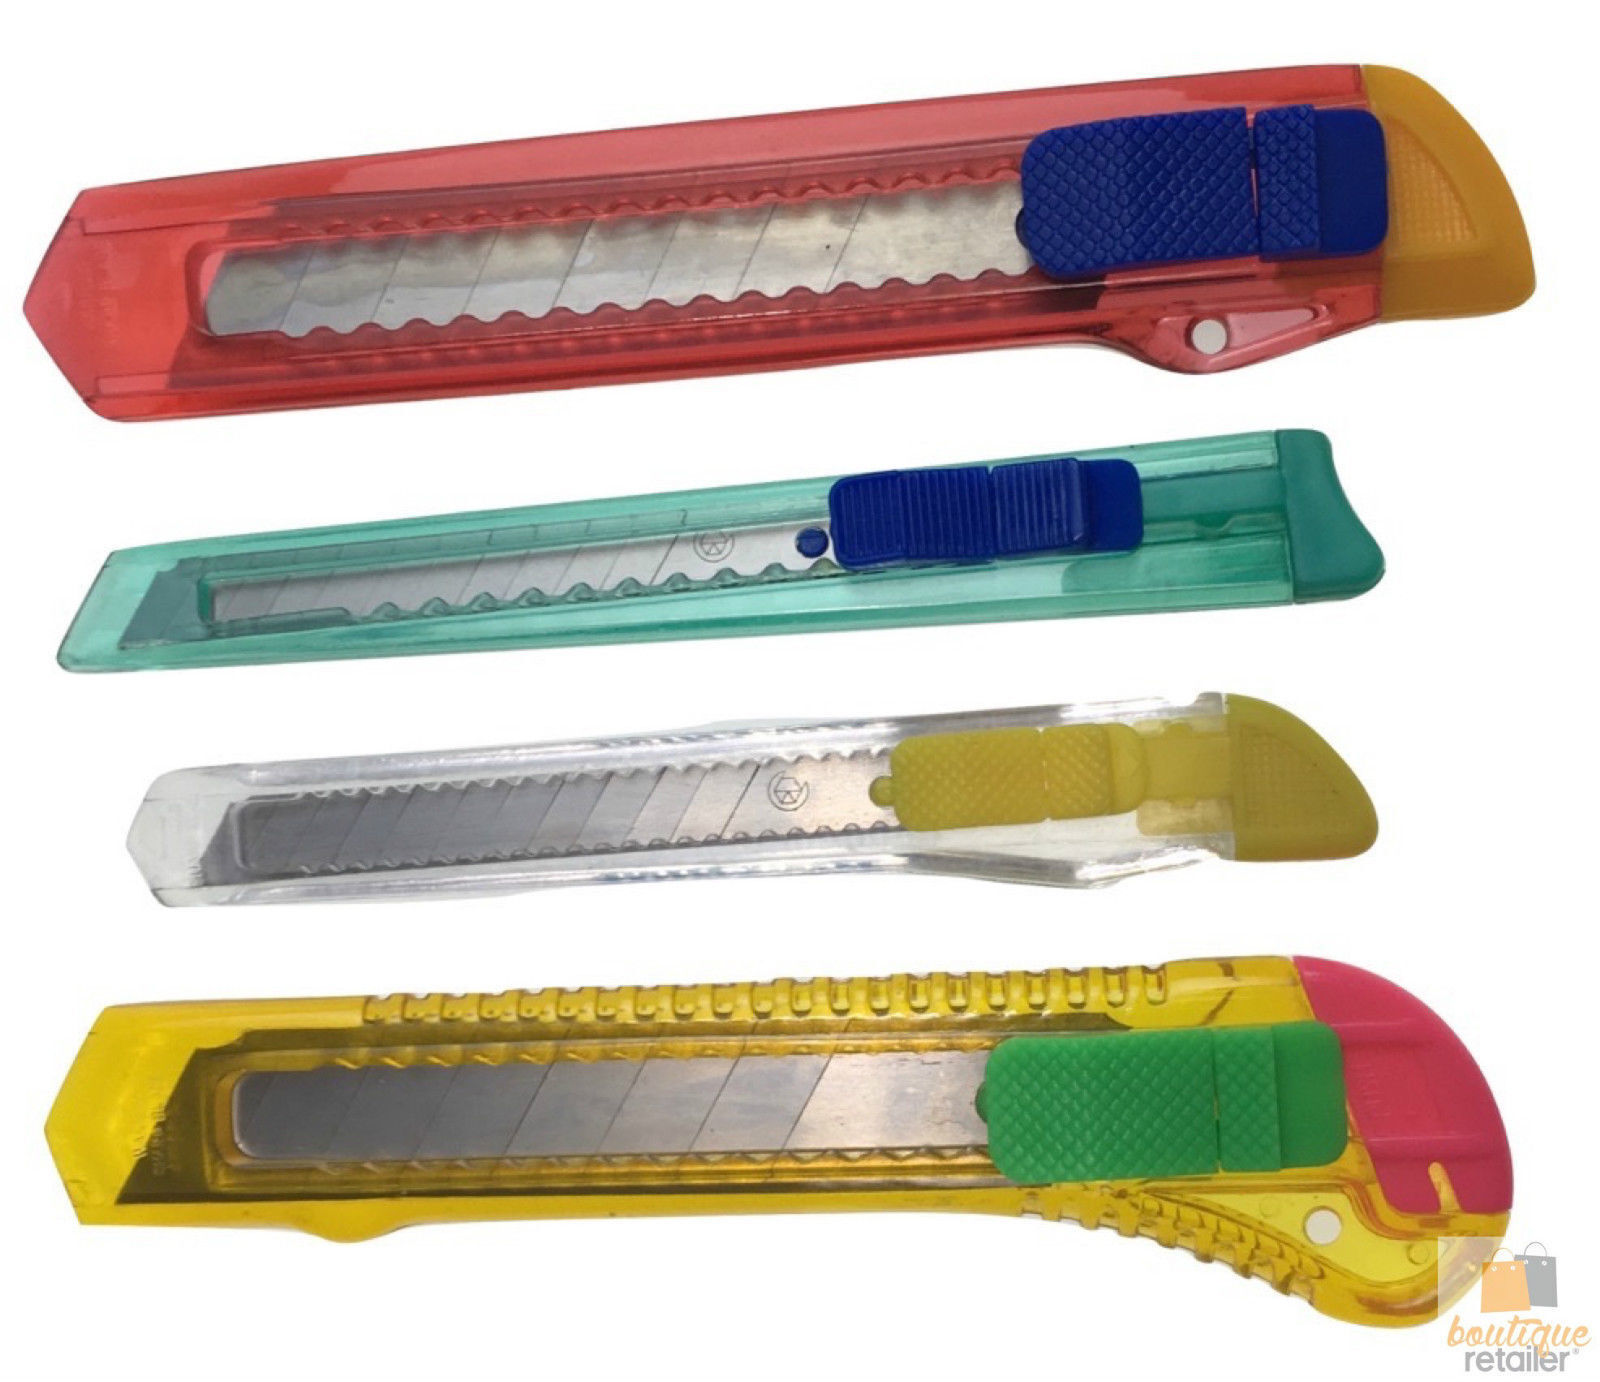 4x BOX CUTTER Knife Retractable Blade Snap Off Razor Durable